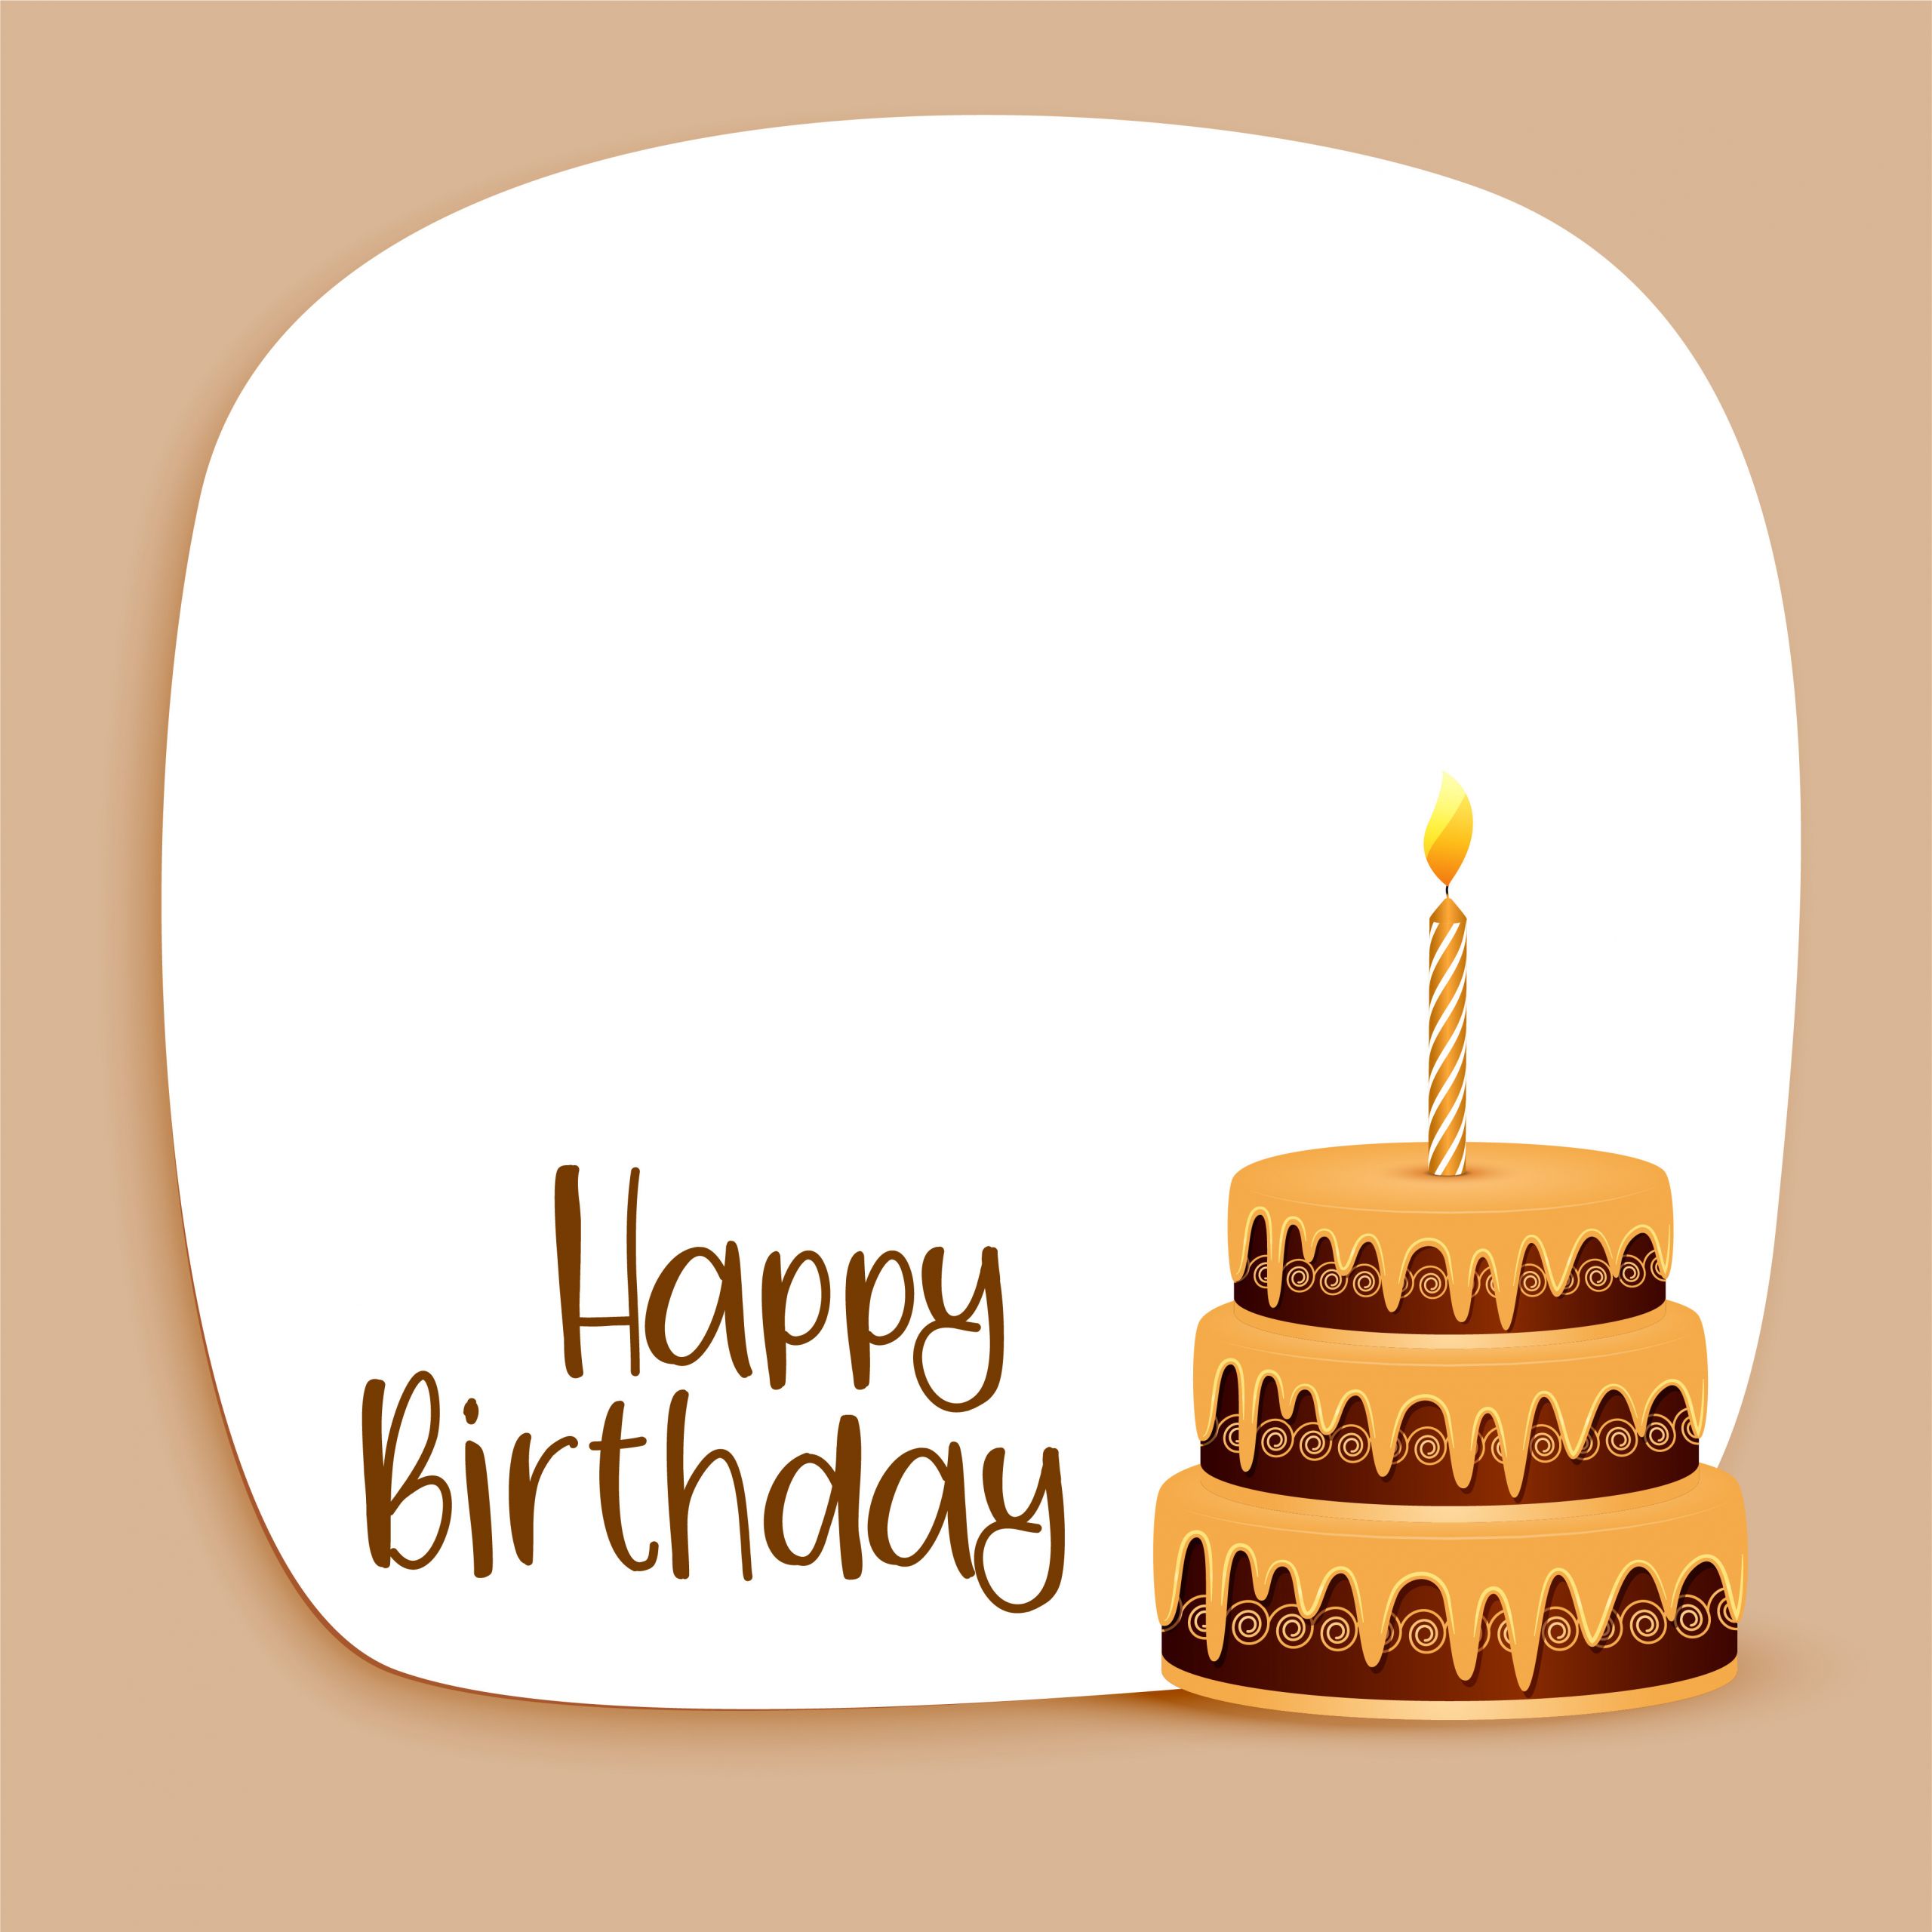 Design A Birthday Card
 happy birthday card design with text space and cake